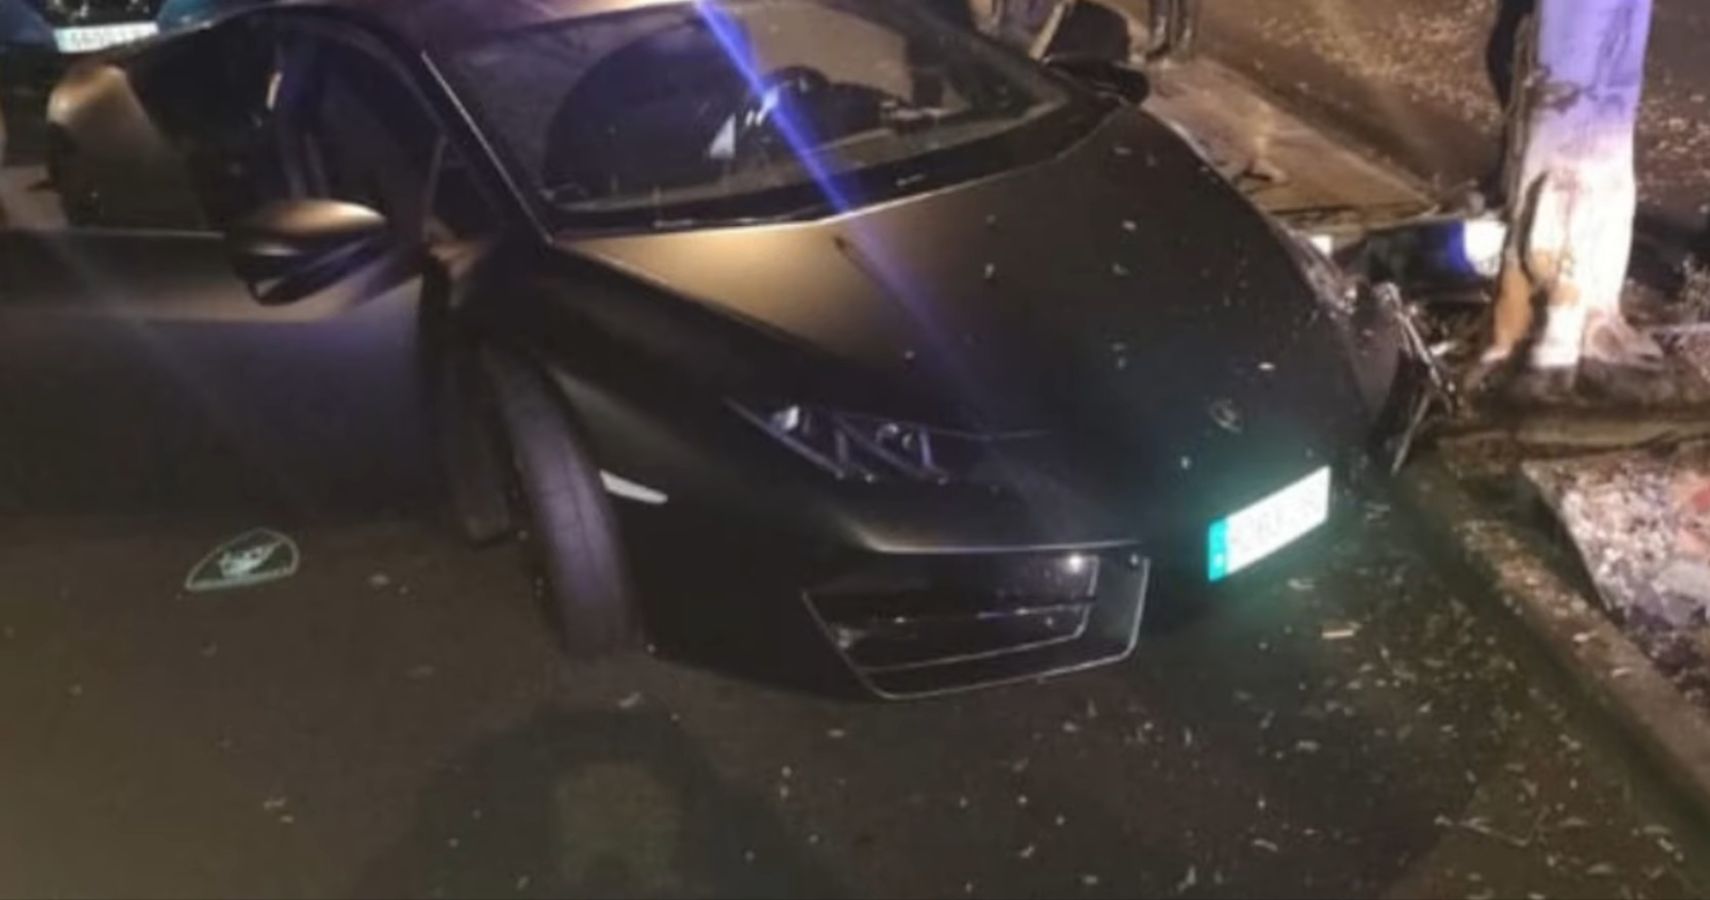 Football Star’s Lamborghini Crashes After He Loaned The Supercar To A Friend